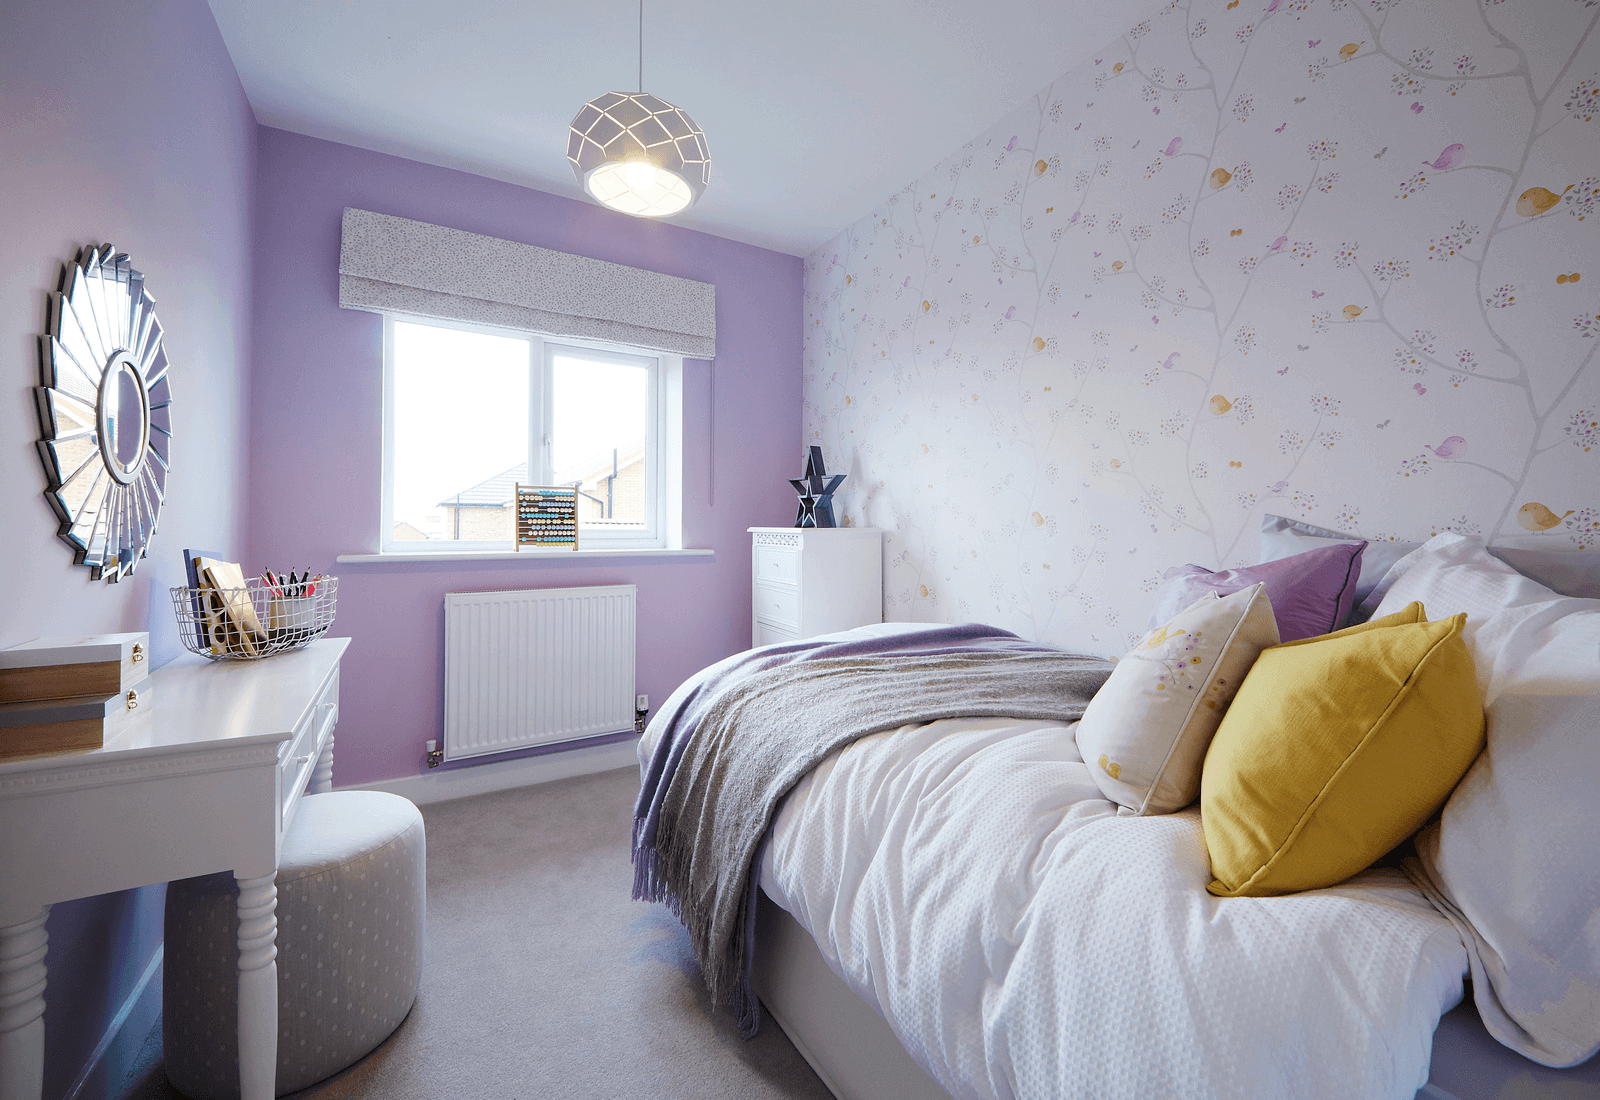 Bedroom 3 in a Baycliffe Show Home